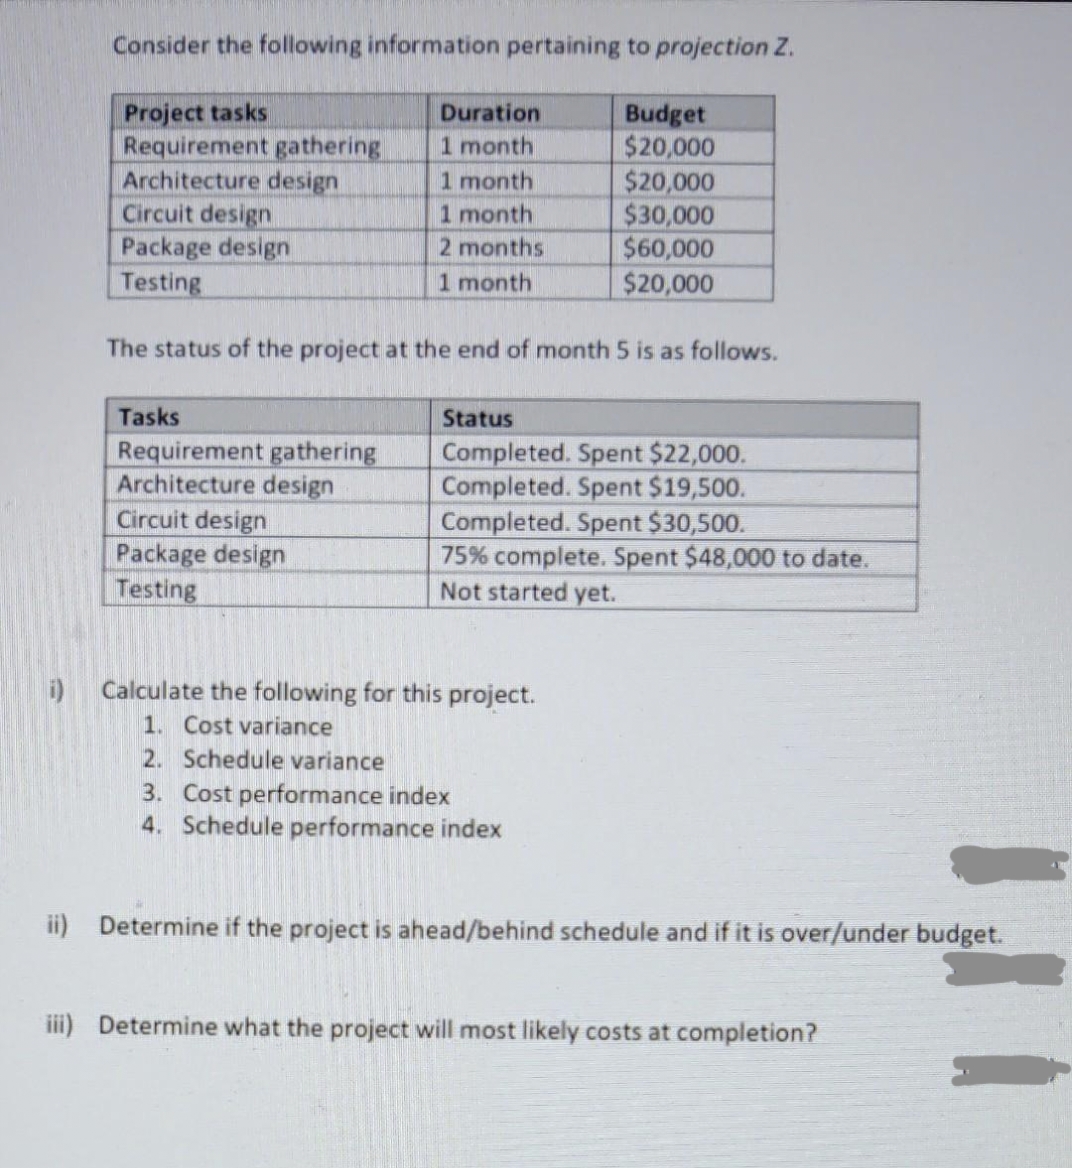 Consider the following information pertaining to projection Z.
Project tasks
Requirement gathering
Architecture design
Circuit design
Package design
Testing
Duration
1 month
1 month
1 month
2 months
Budget
$20,000
$20,000
$30,000
$60,000
$20,000
1 month
The status of the project at the end of month 5 is as follows.
Tasks
Status
Requirement gathering
Architecture design
Circuit design
Package design
Testing
Completed. Spent $22,000.
Completed. Spent $19,500.
Completed. Spent $30,500.
75% complete. Spent $48,000 to date.
Not started yet.
i)
Calculate the following for this project.
1. Cost variance
2. Schedule variance
3. Cost performance index
4. Schedule performance index
ii) Determine if the project is ahead/behind schedule and if it is over/under budget.
iii) Determine what the project will most likely costs at completion?
